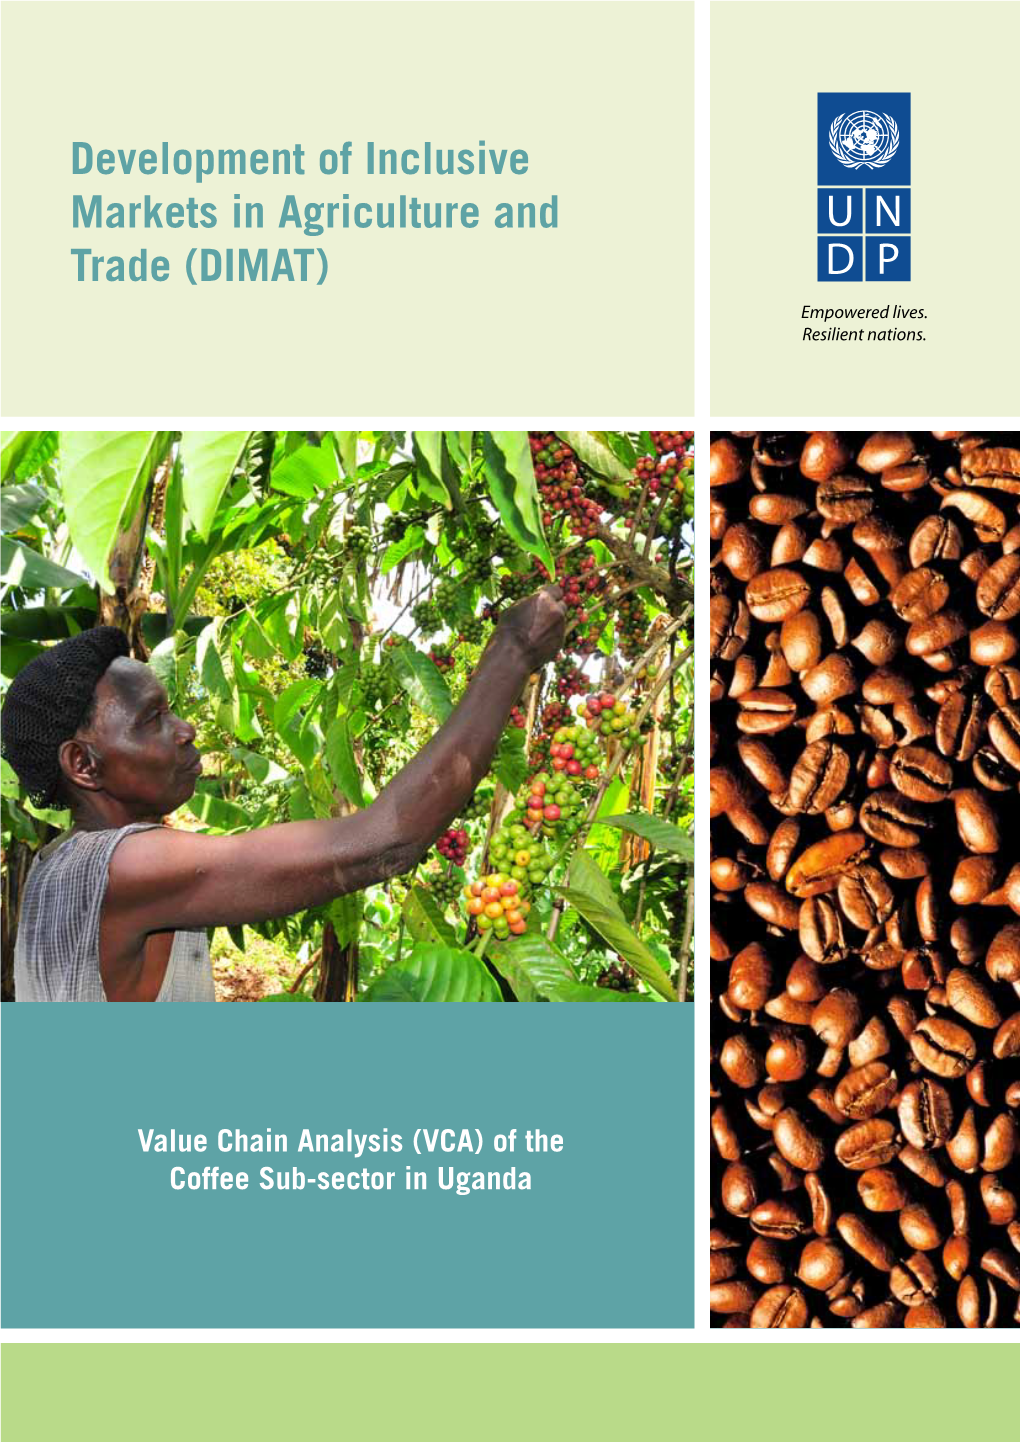 Development of Inclusive Markets in Agriculture and Trade (DIMAT)